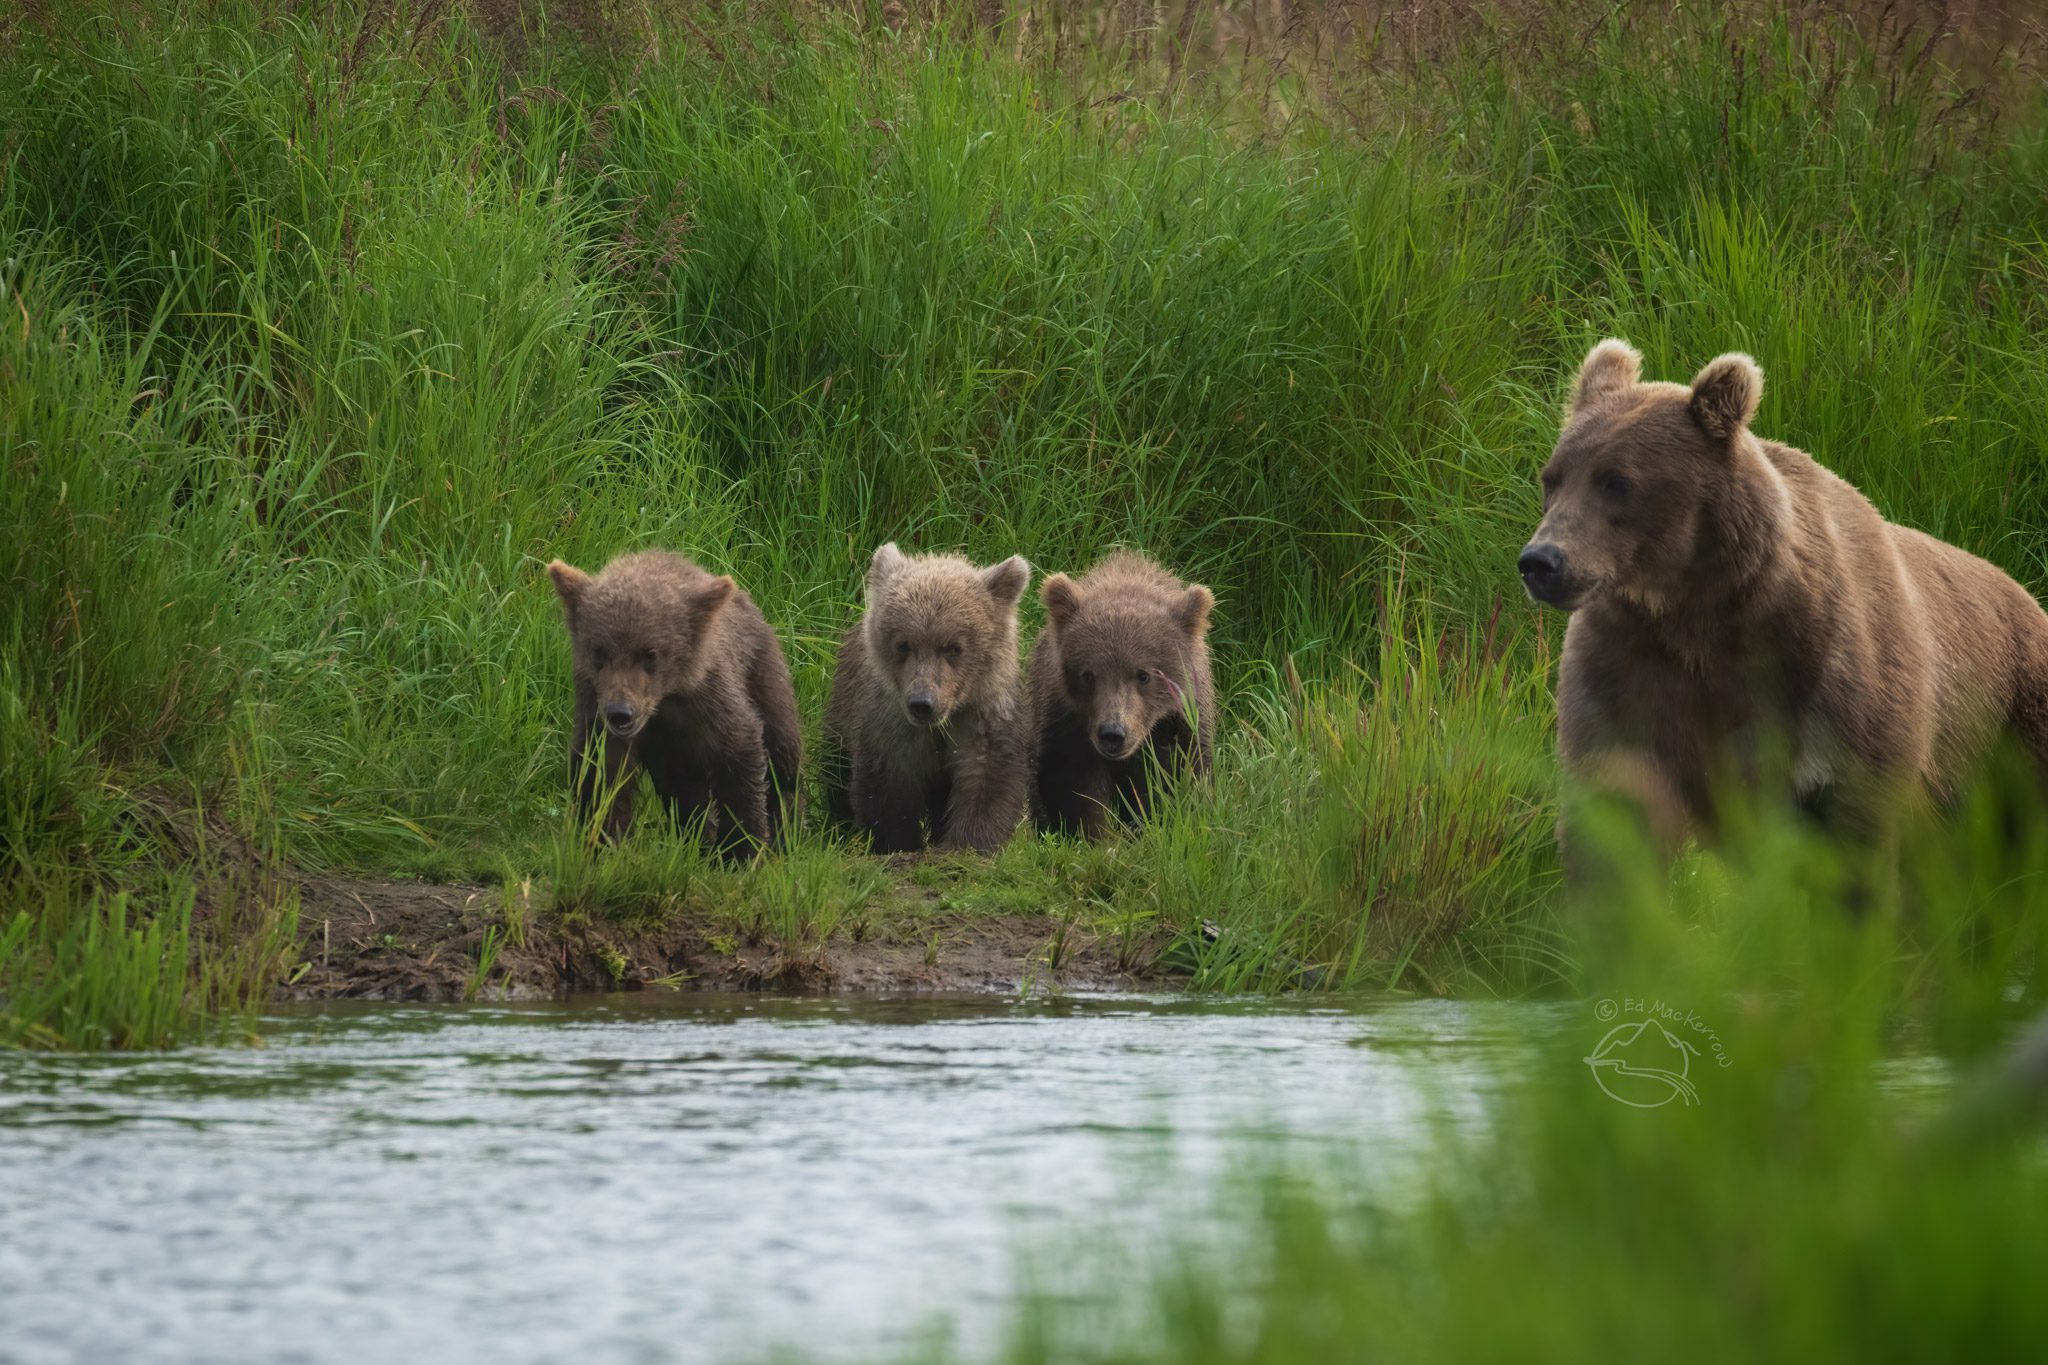 Mother brown bear with three spring cubs walking the bank of the Brooks River, Katmai National Park, Alaska